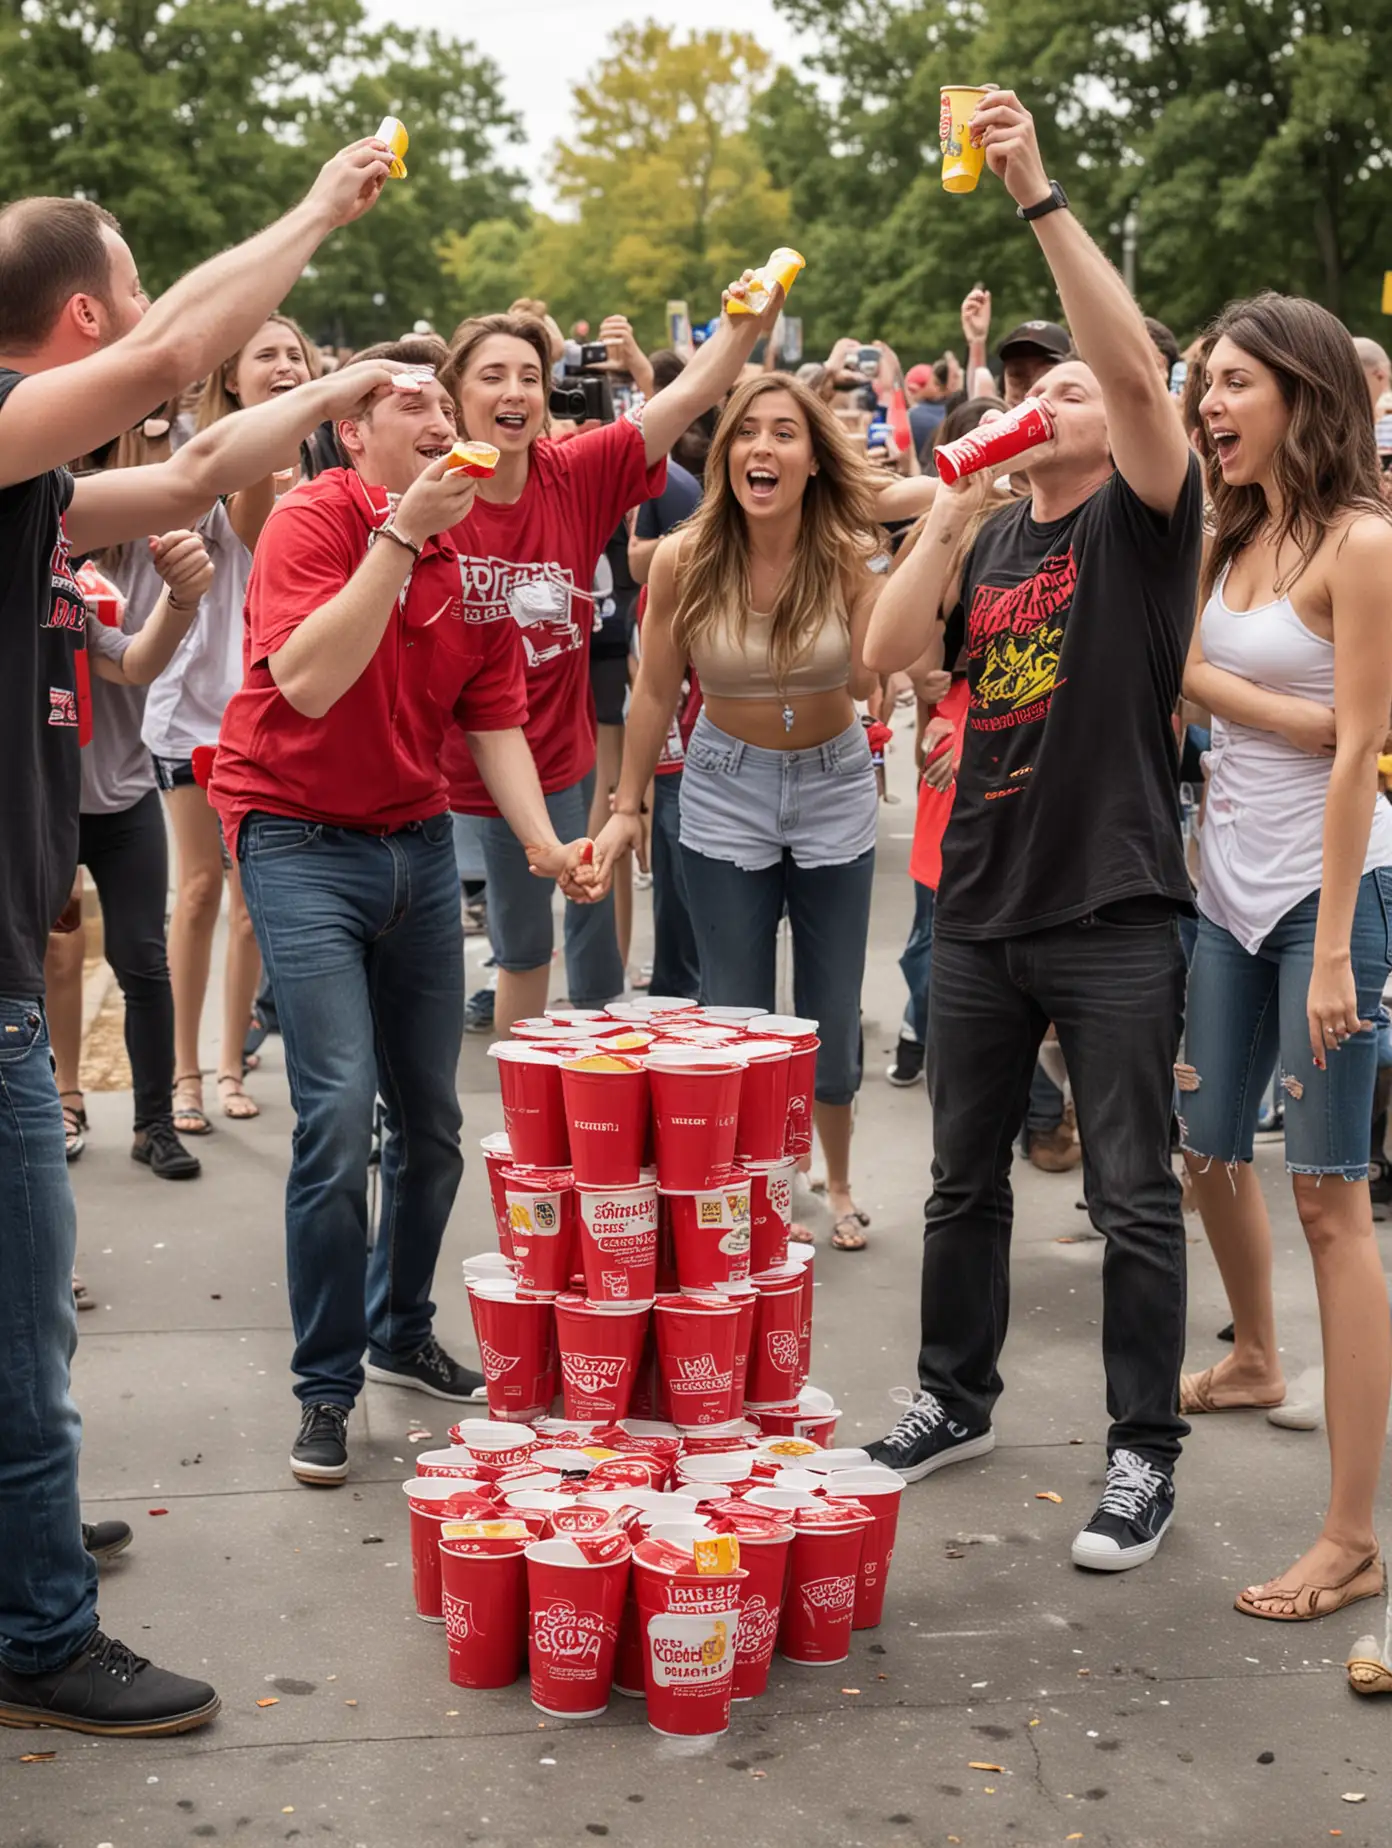 Joey Chestnut and friends tossing mustard packets into a red solo cup from a Distance